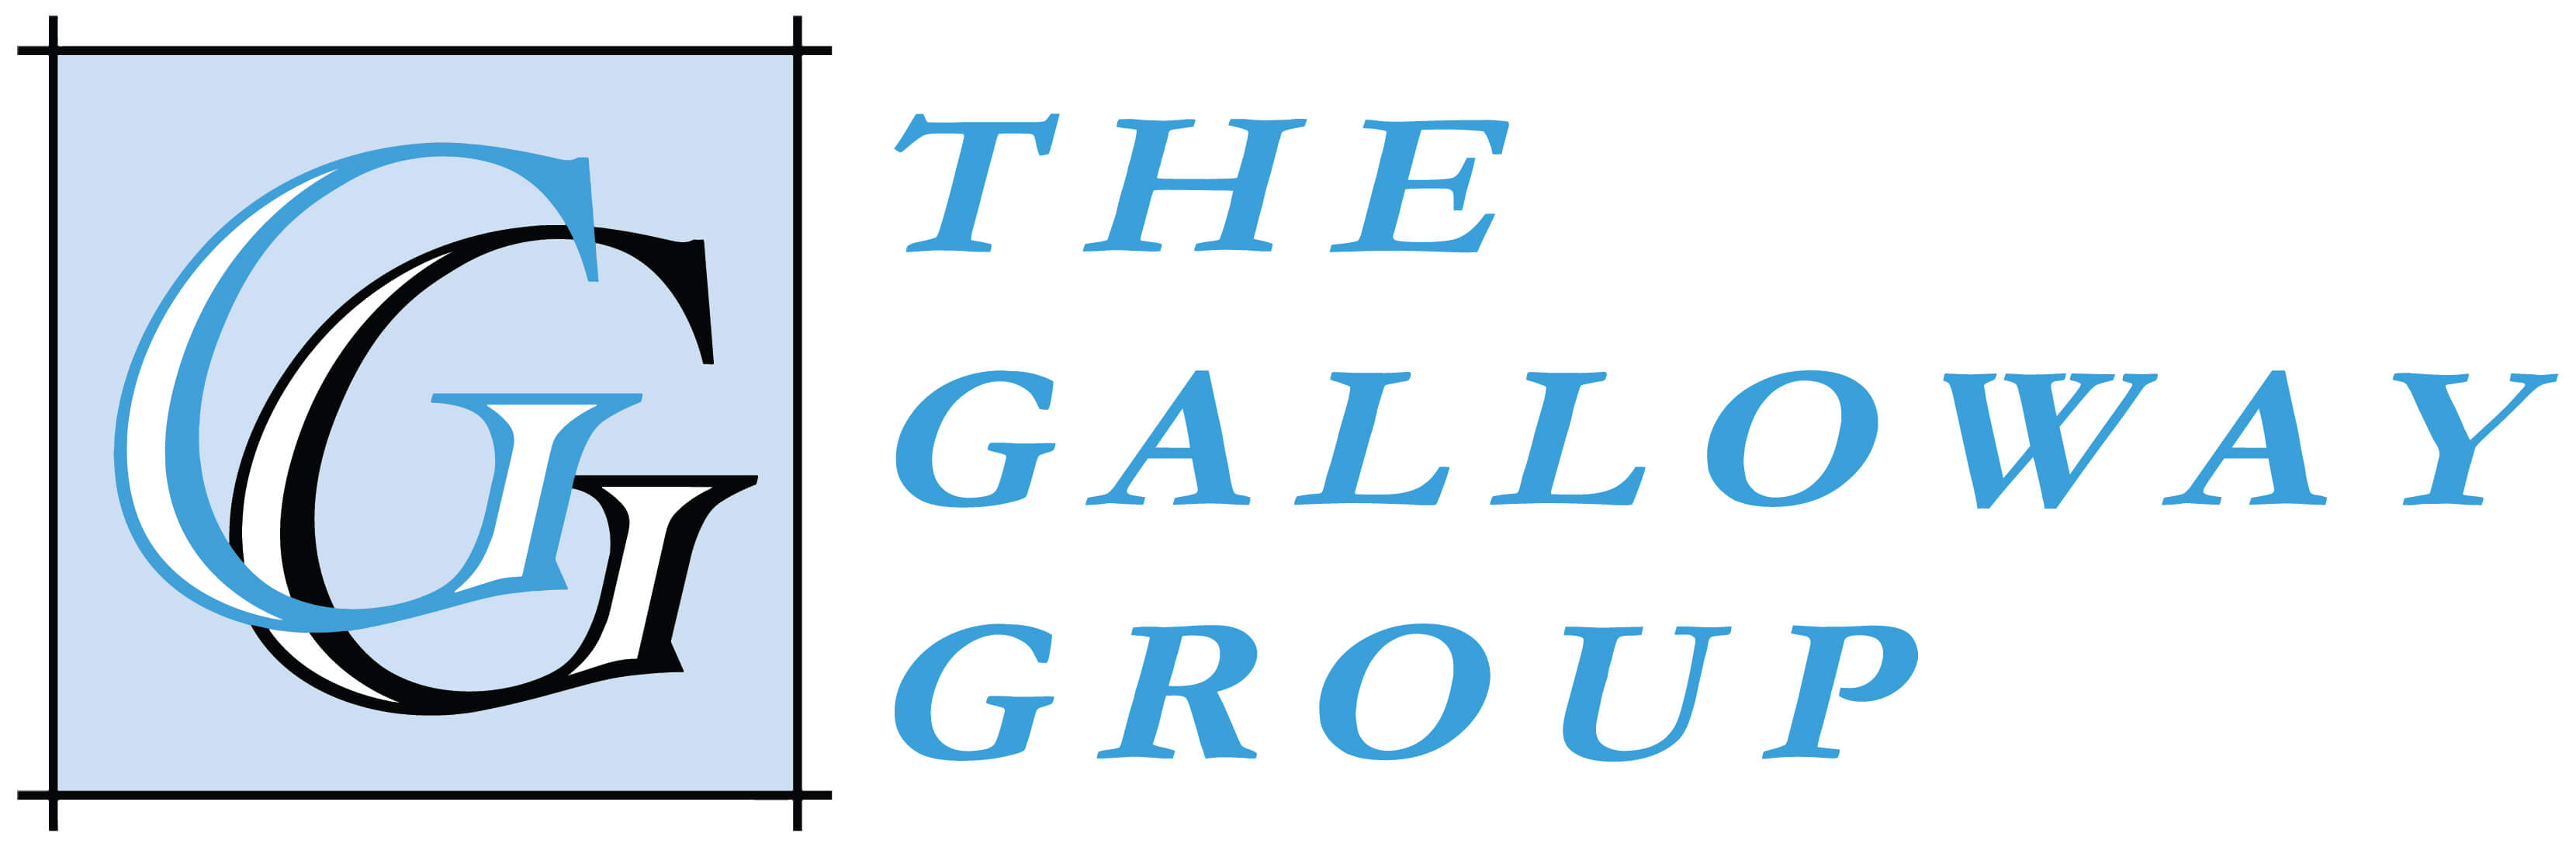 The Galloway Group